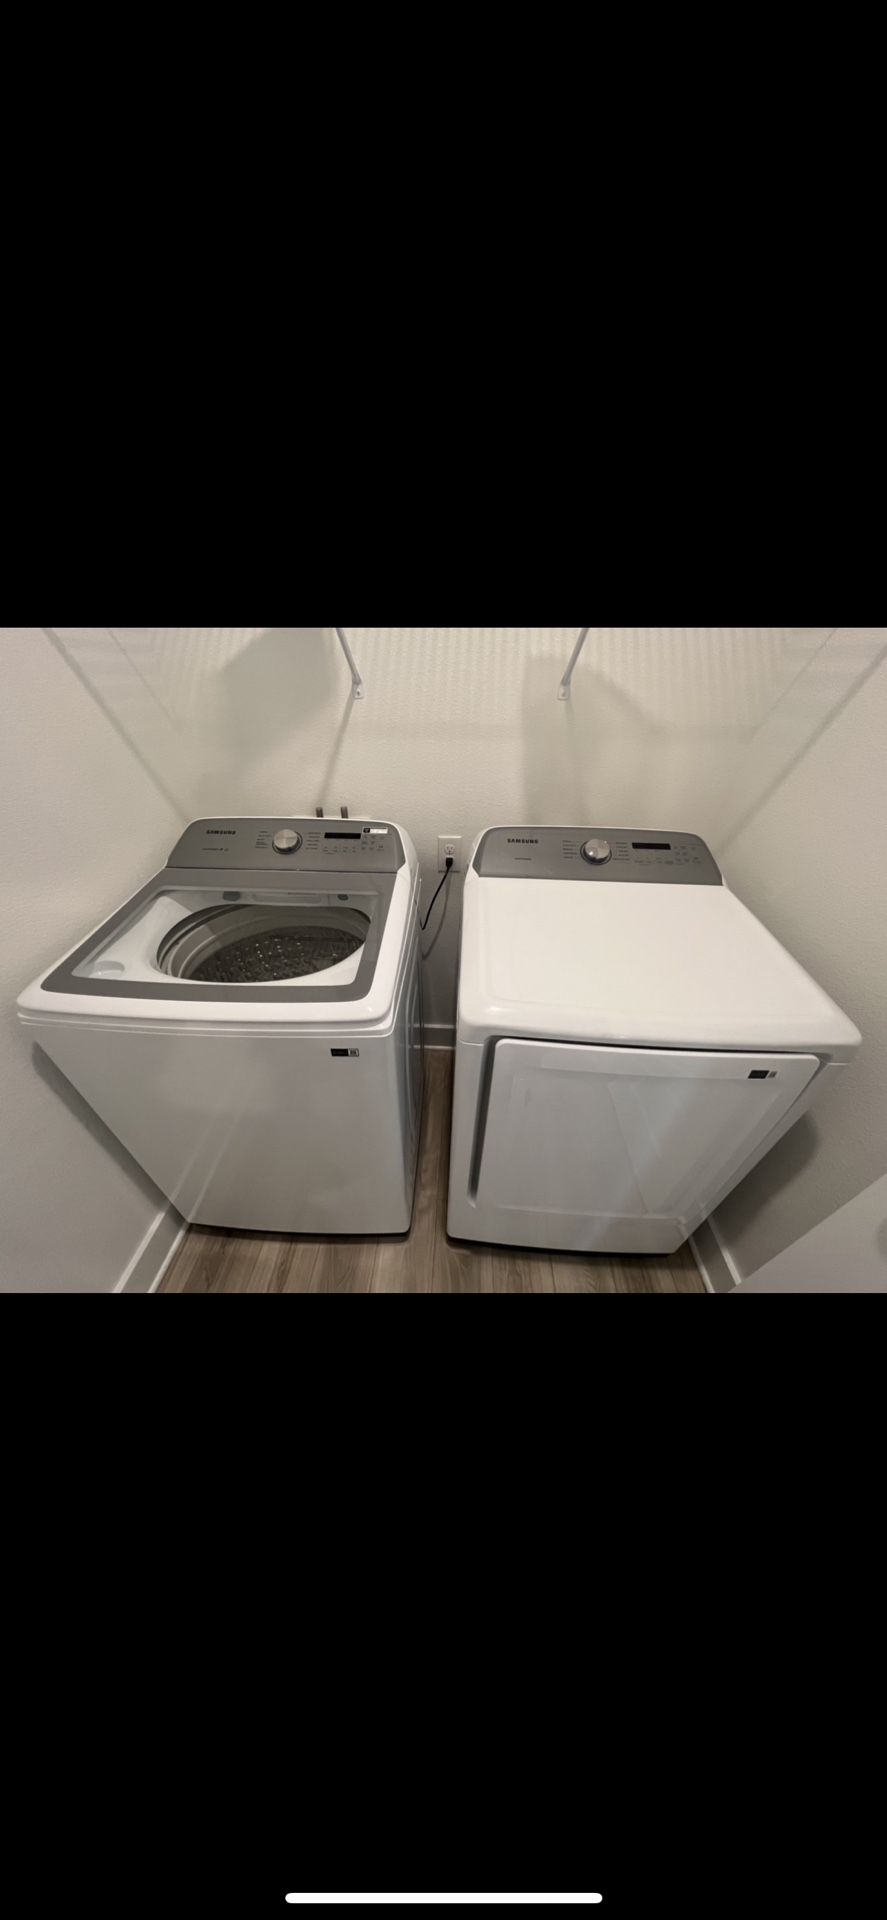 Samsung Washer and Dryer (New)